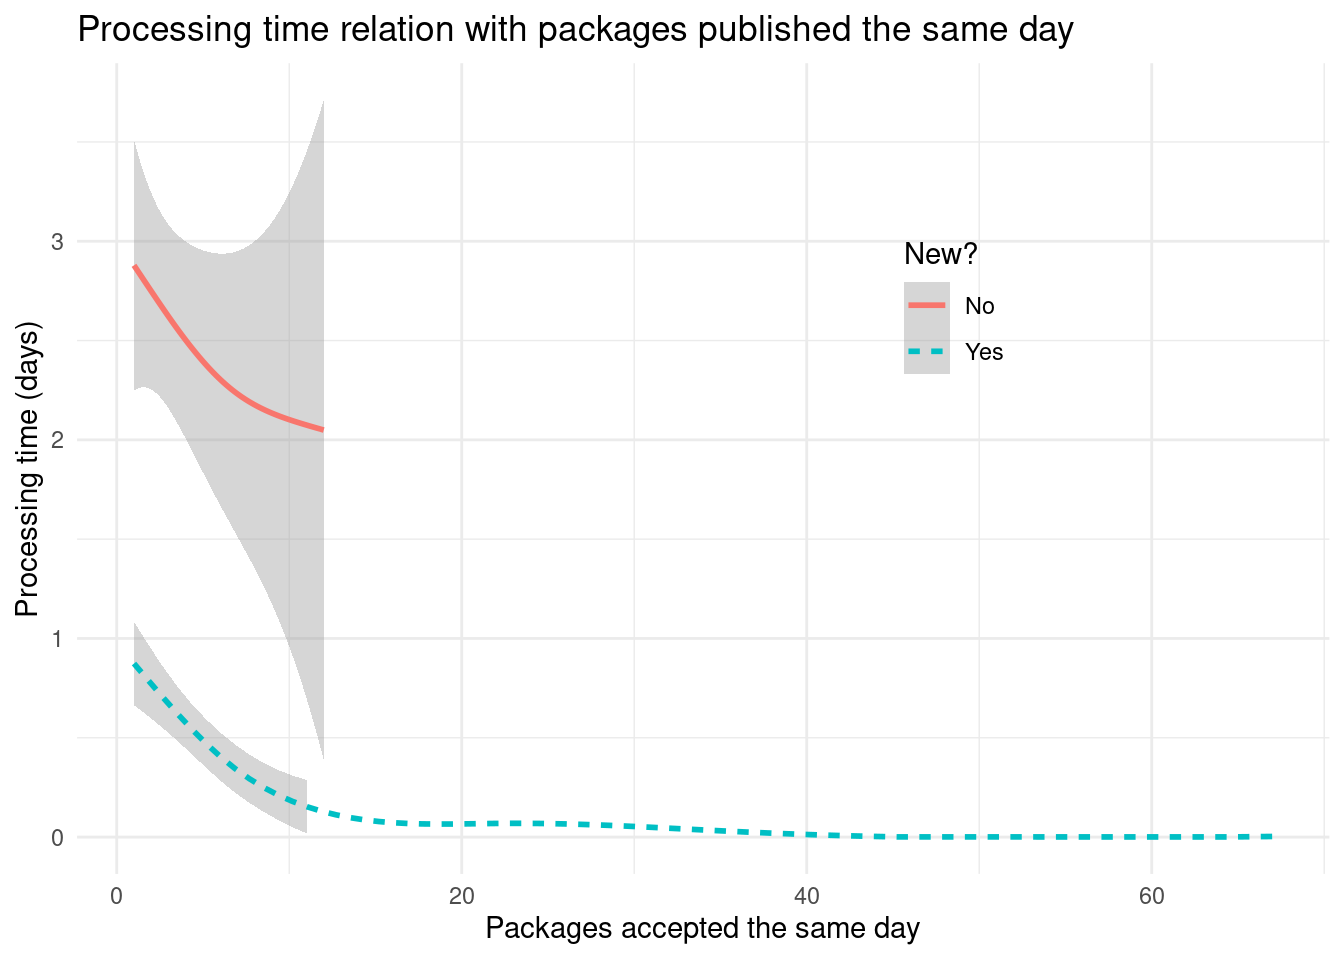 ggplot graphic with the time of processing time and the number of packages accepted the same day. New packages have less delay than already published packages, but the more packages are accepted, the less delay there is.